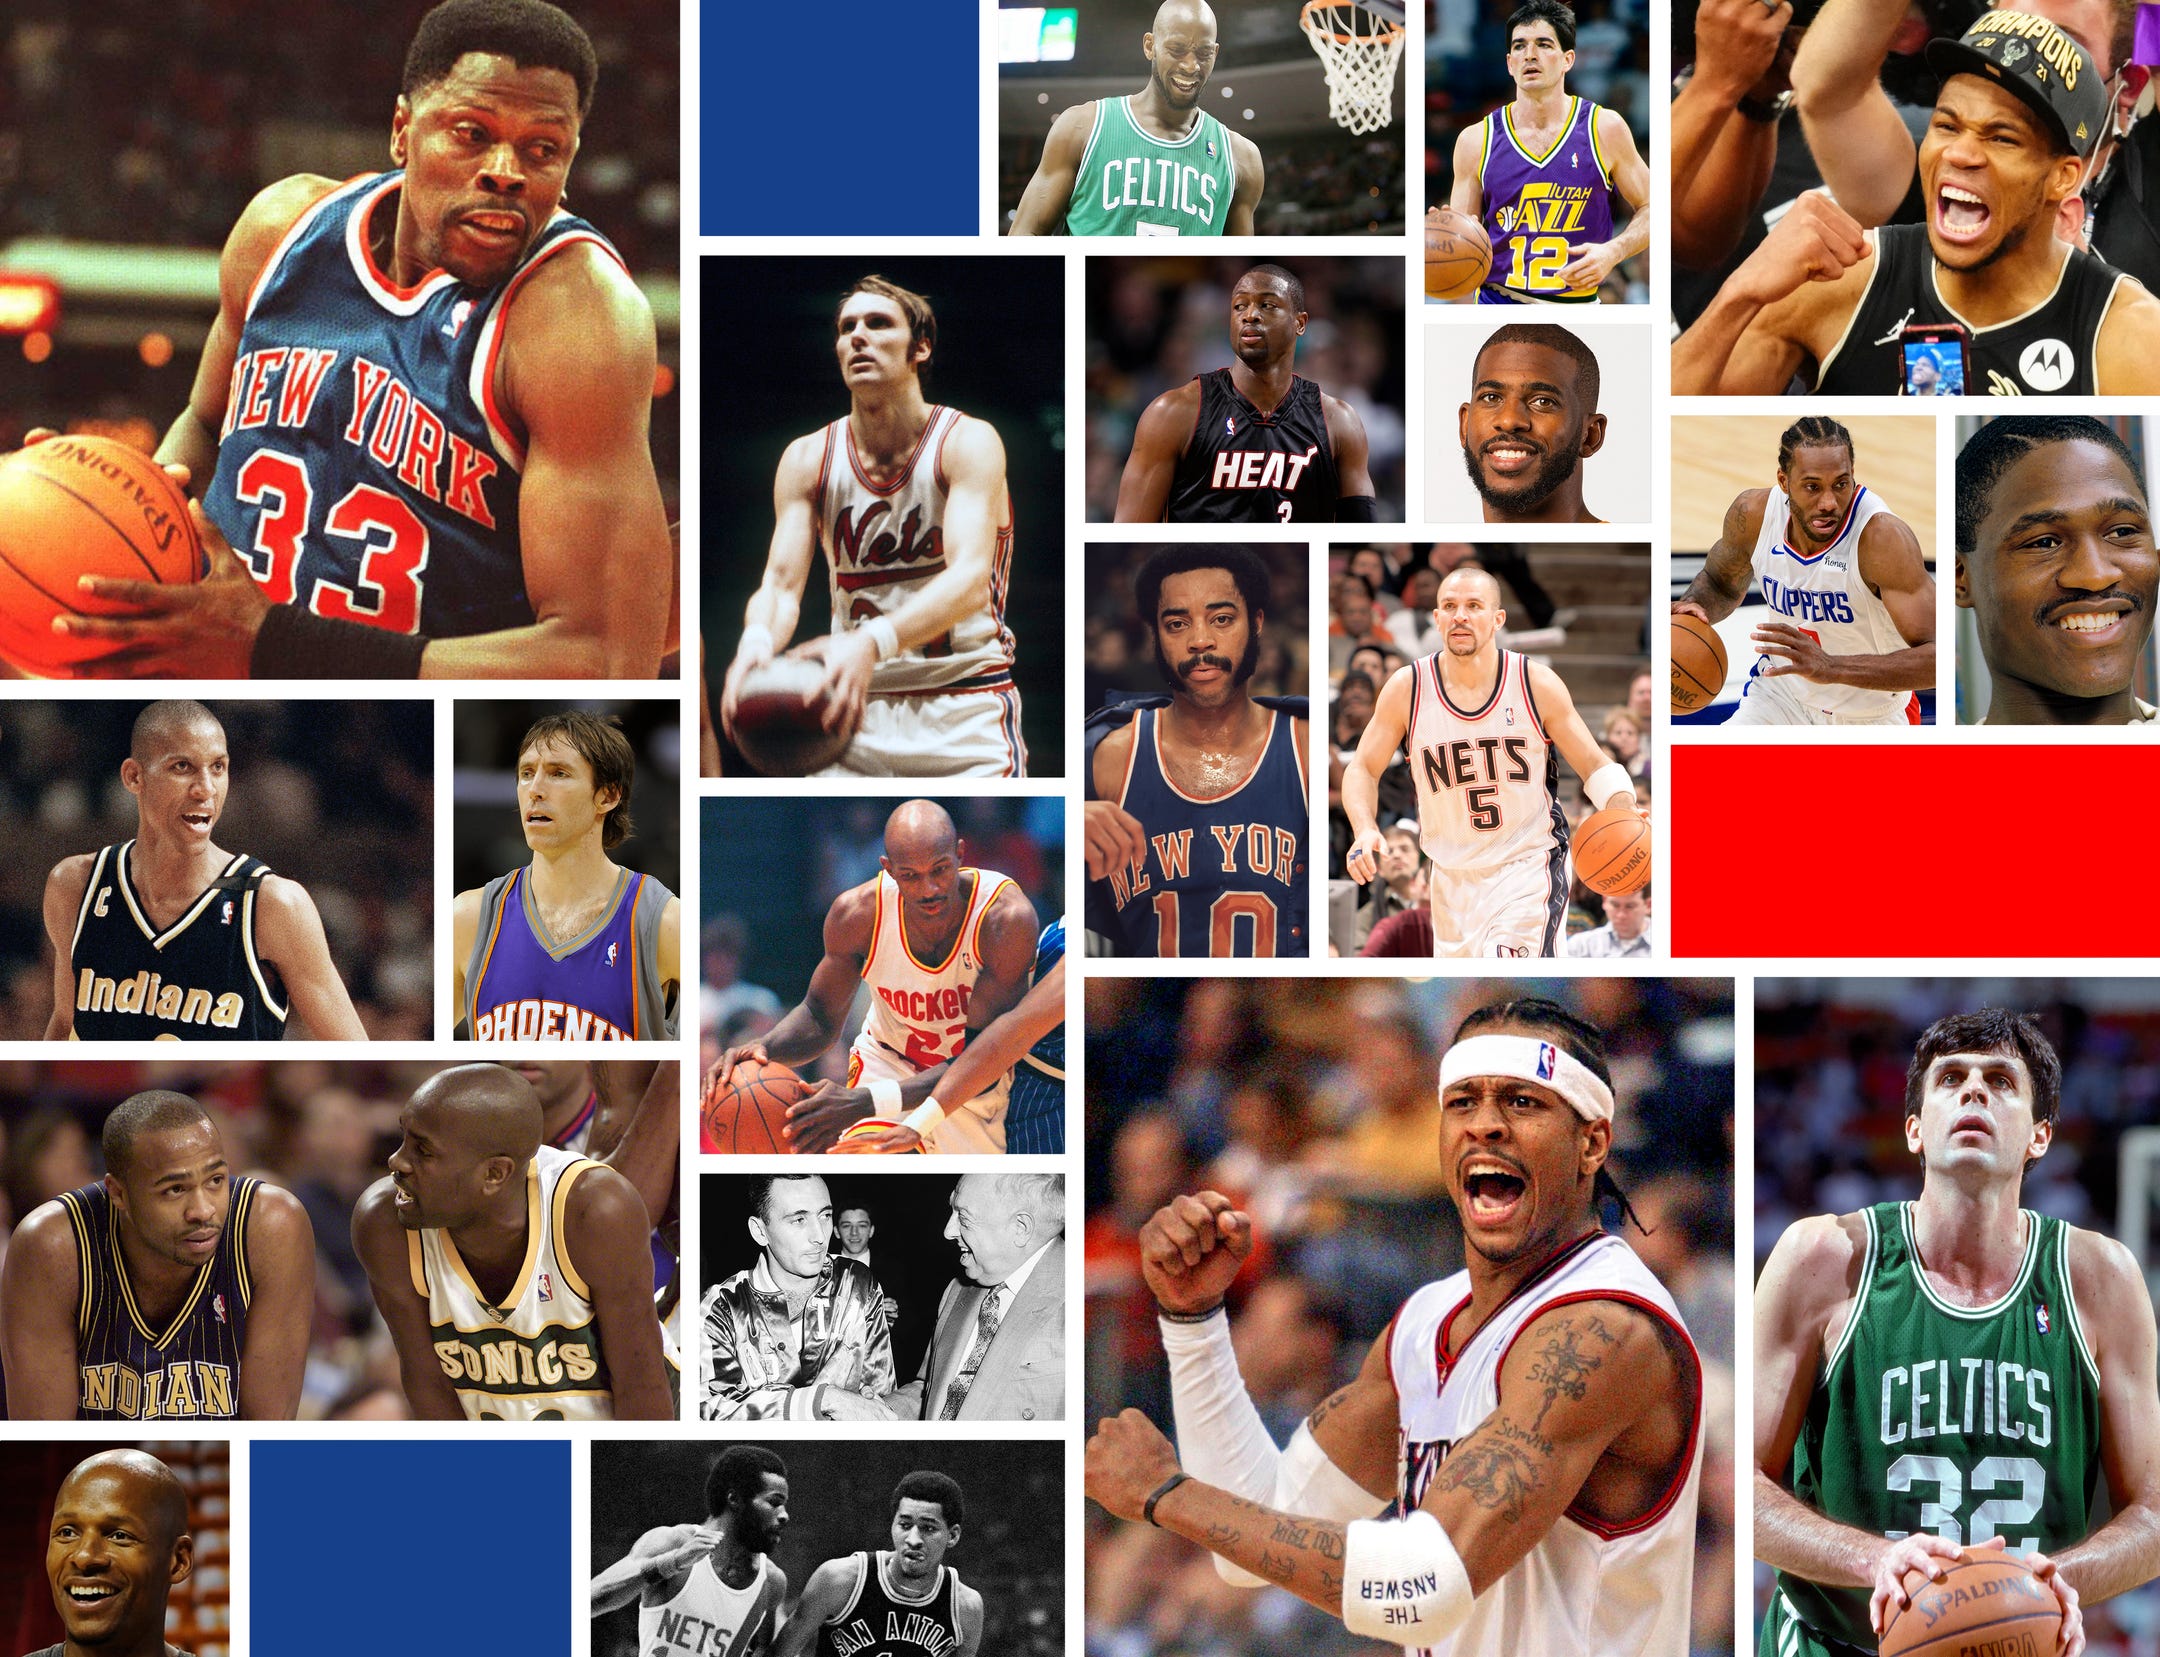 50 states, 100 NBA players: We select the best from New York to